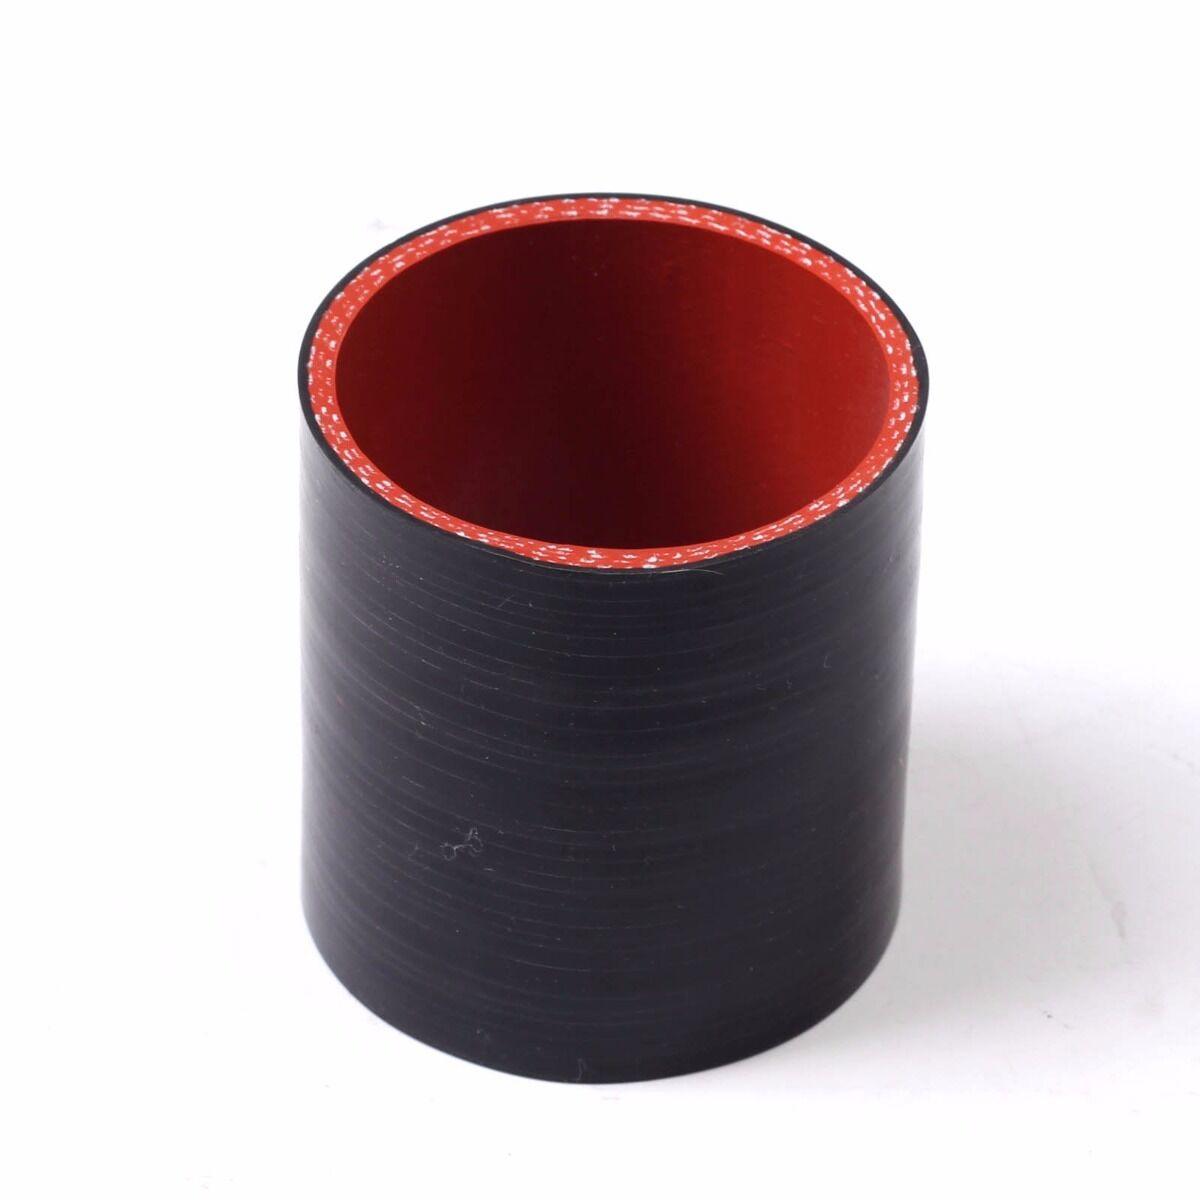 2 1/2" 2.5" Straight Silicone Hose Pipe Black-Red 63mm Intercooler Coupler Turbo - www.blackhorse-racing.com